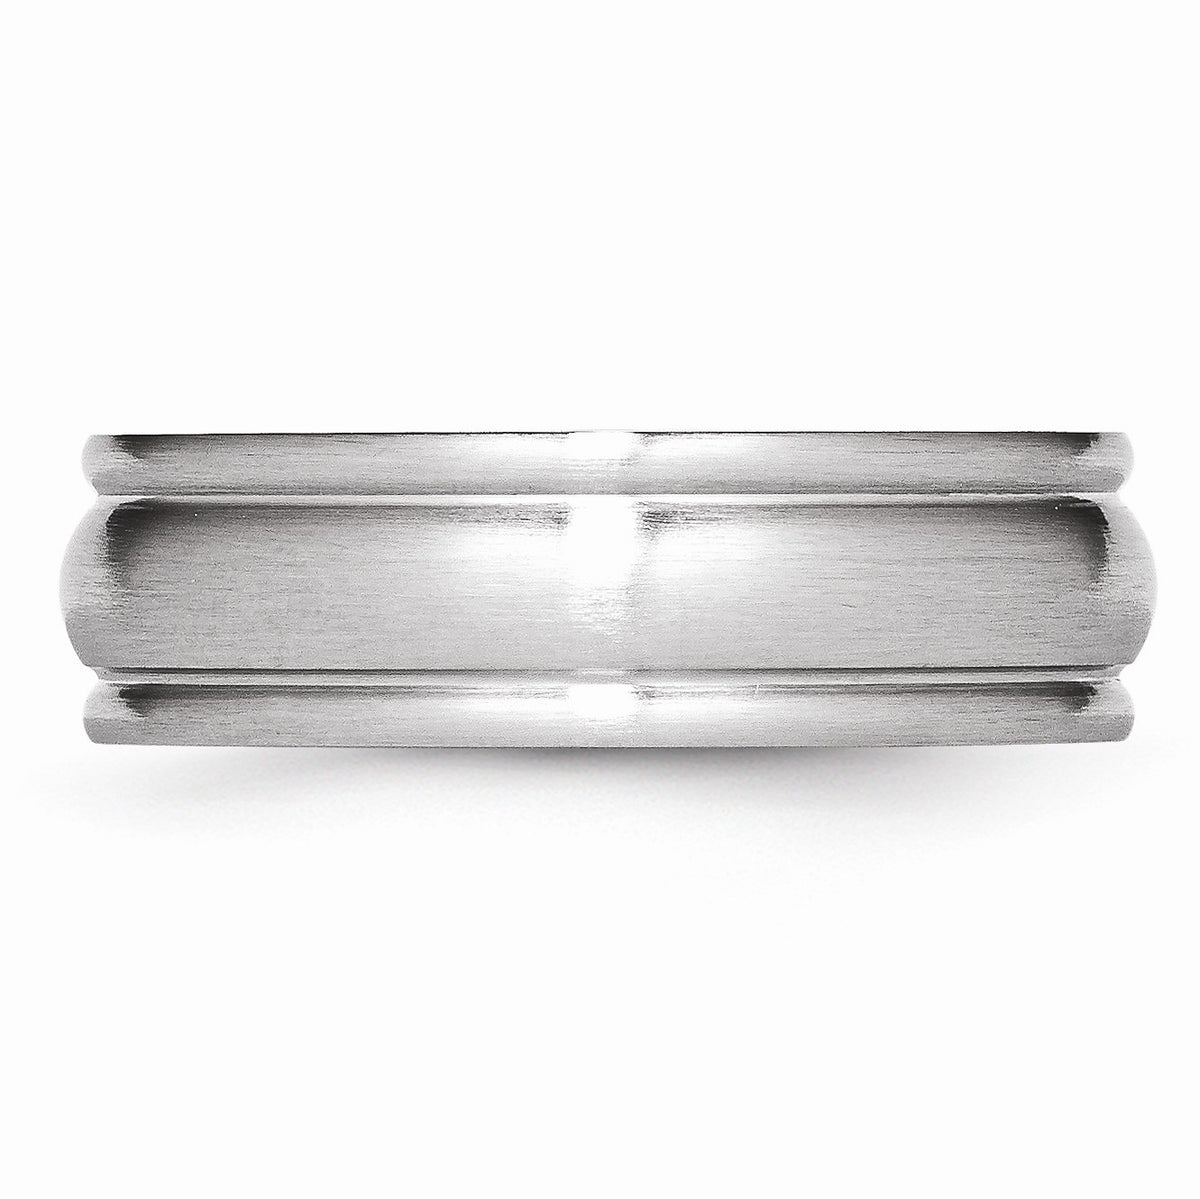 Alternate view of the 7mm Cobalt Satin &amp; Polished Rounded Edge Comfort Fit Band by The Black Bow Jewelry Co.